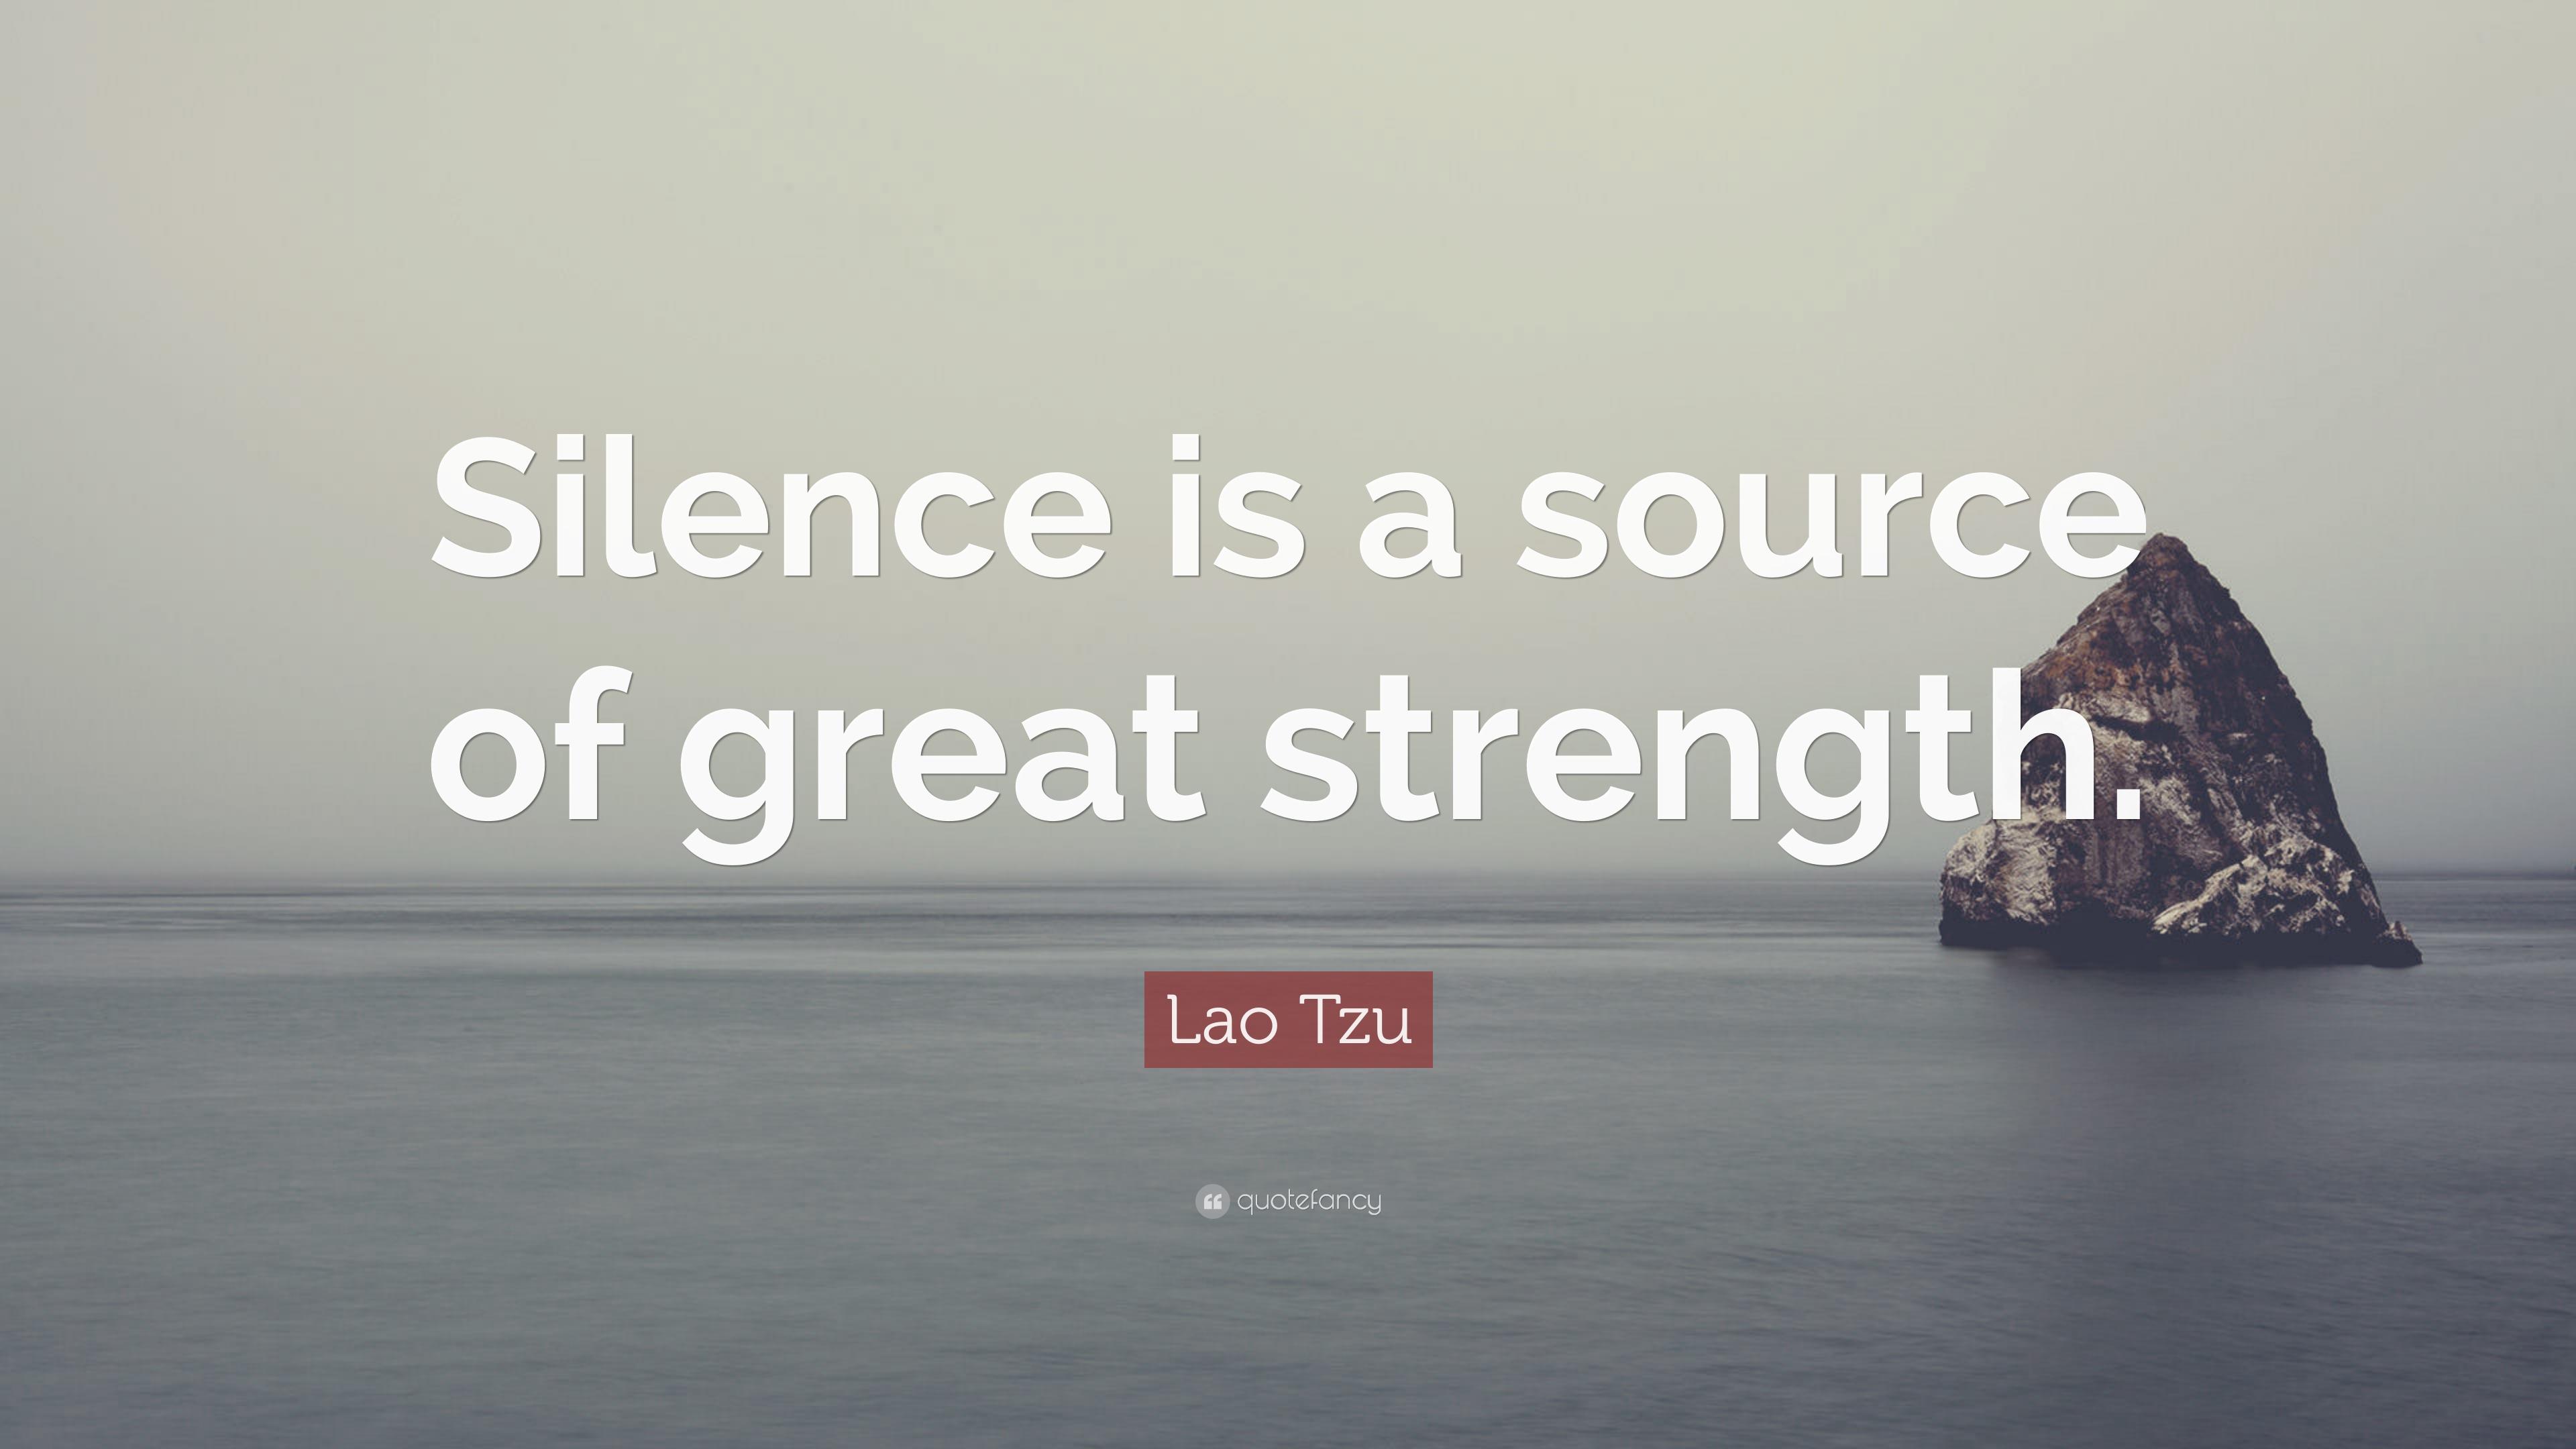 Lao Tzu Quote: "Silence is a source of great strength. 